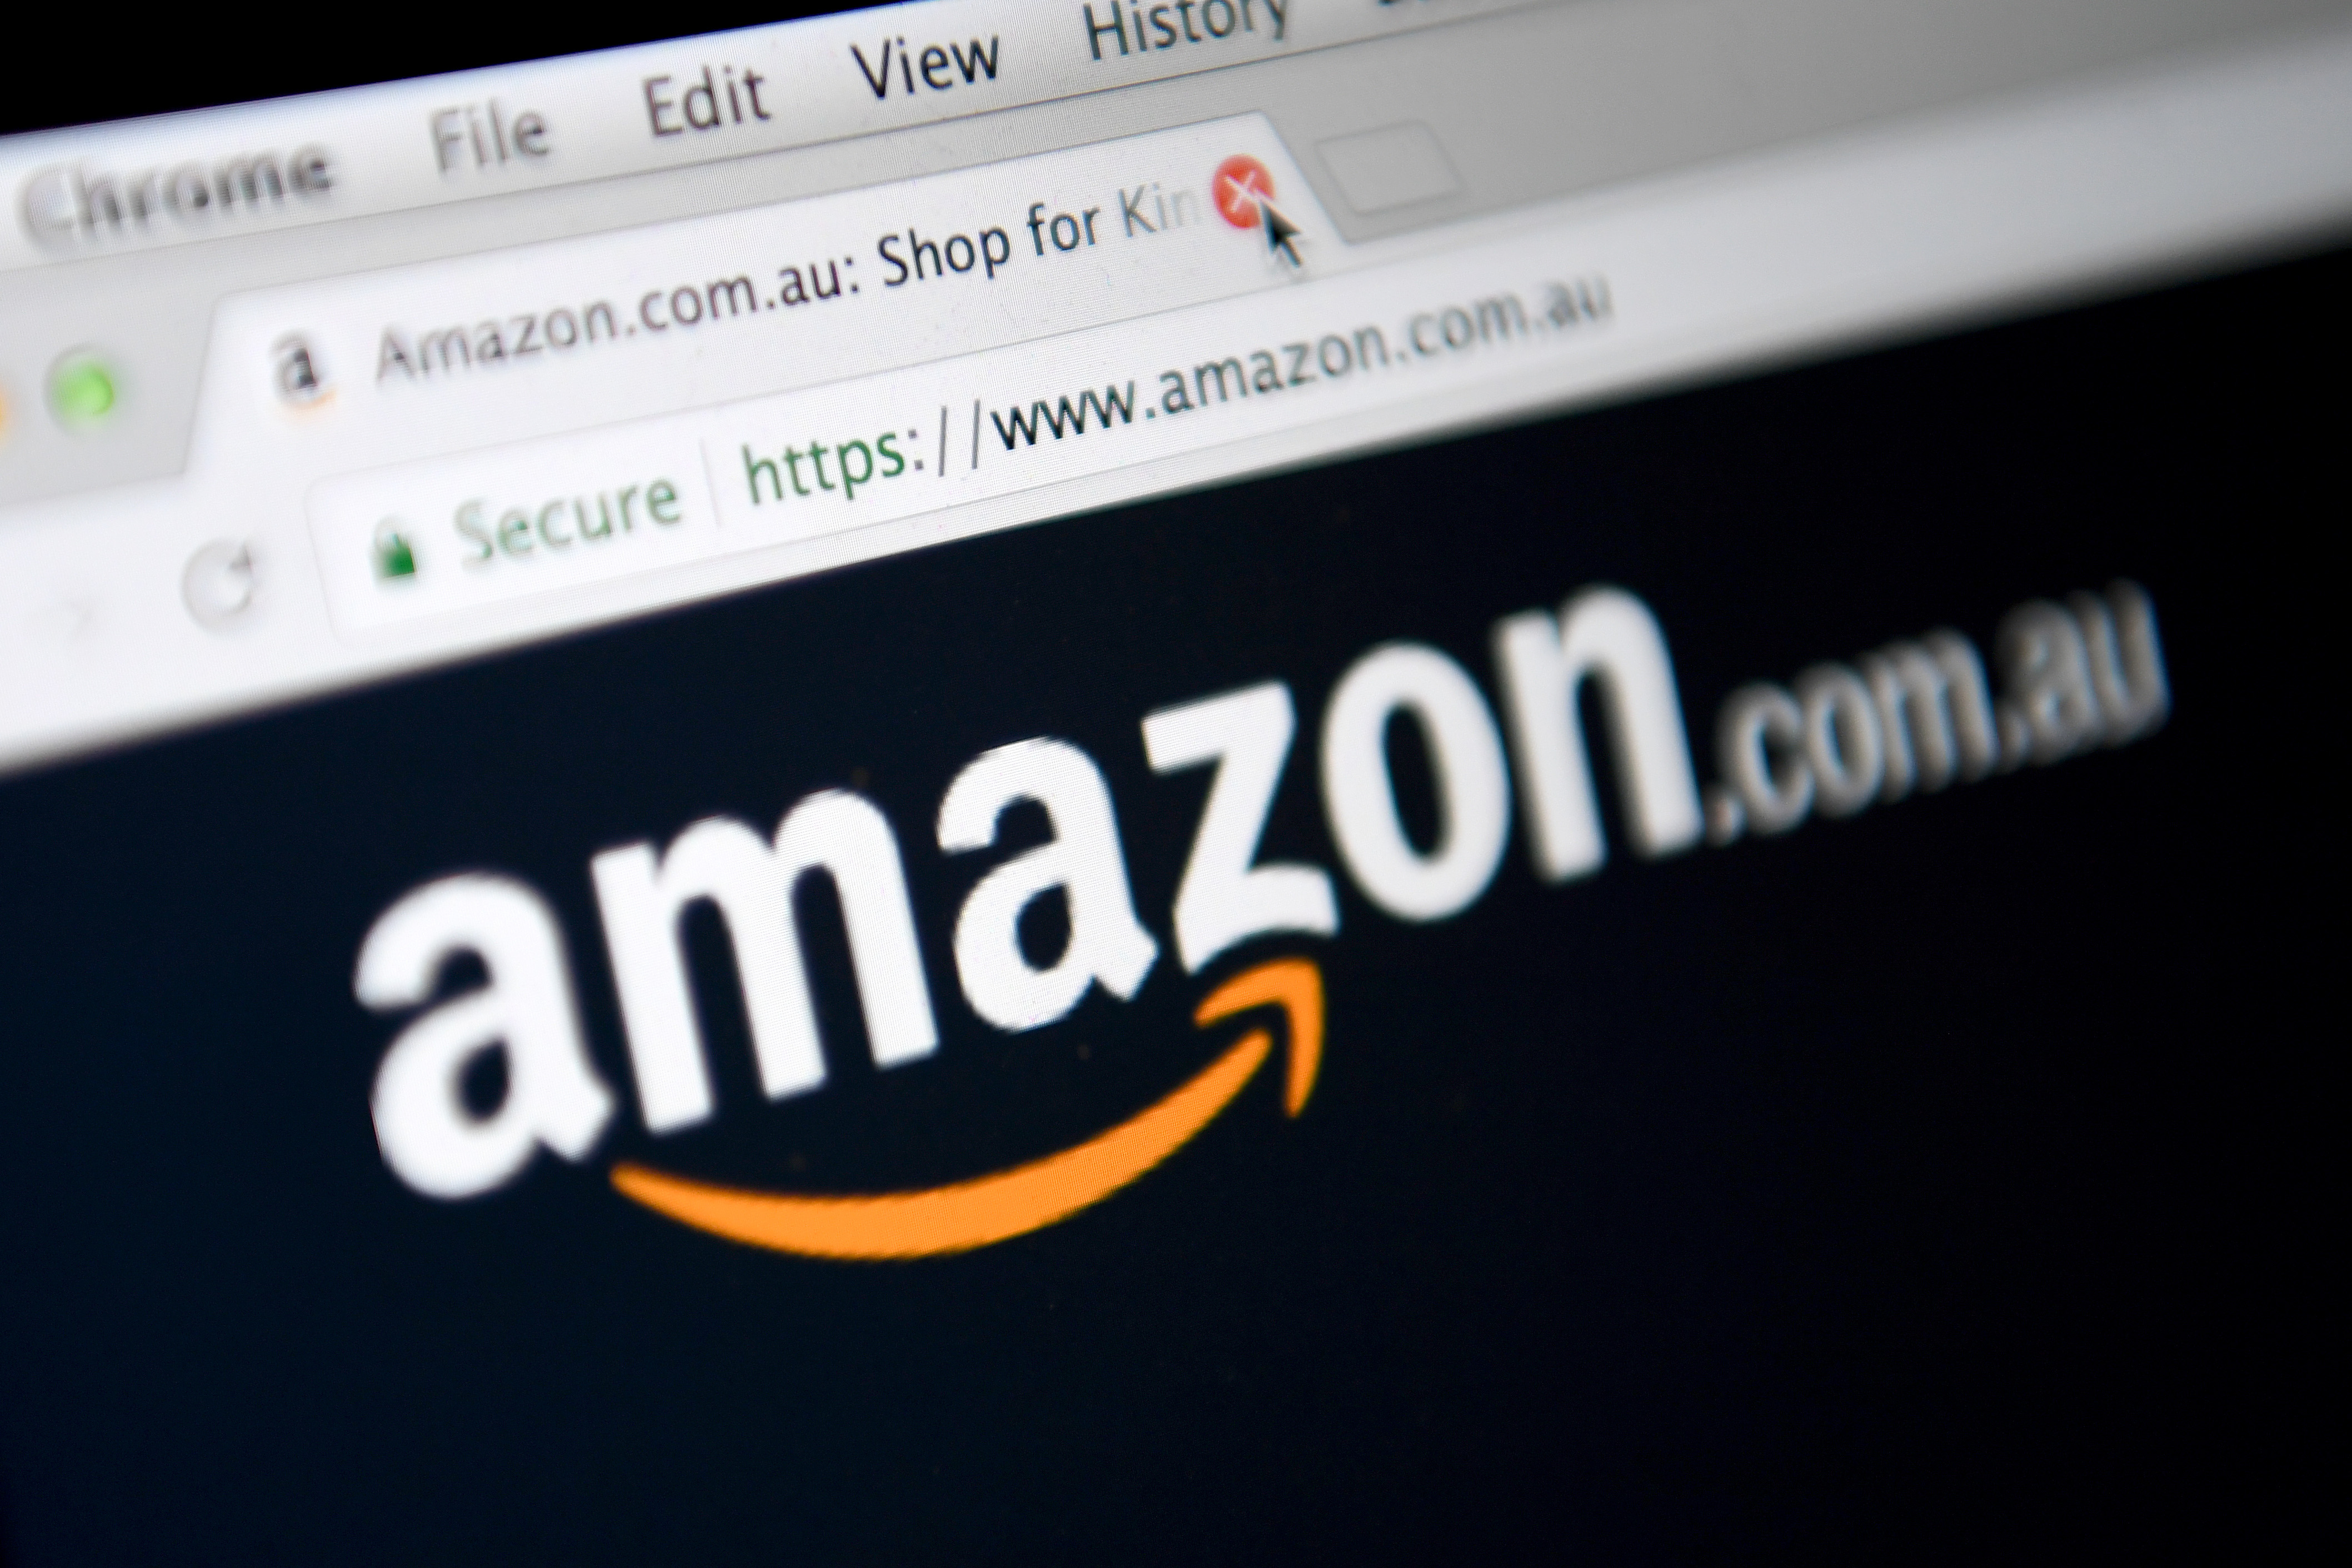 Amazon has backflipped on its decision to block Australians from shopping from its US site.